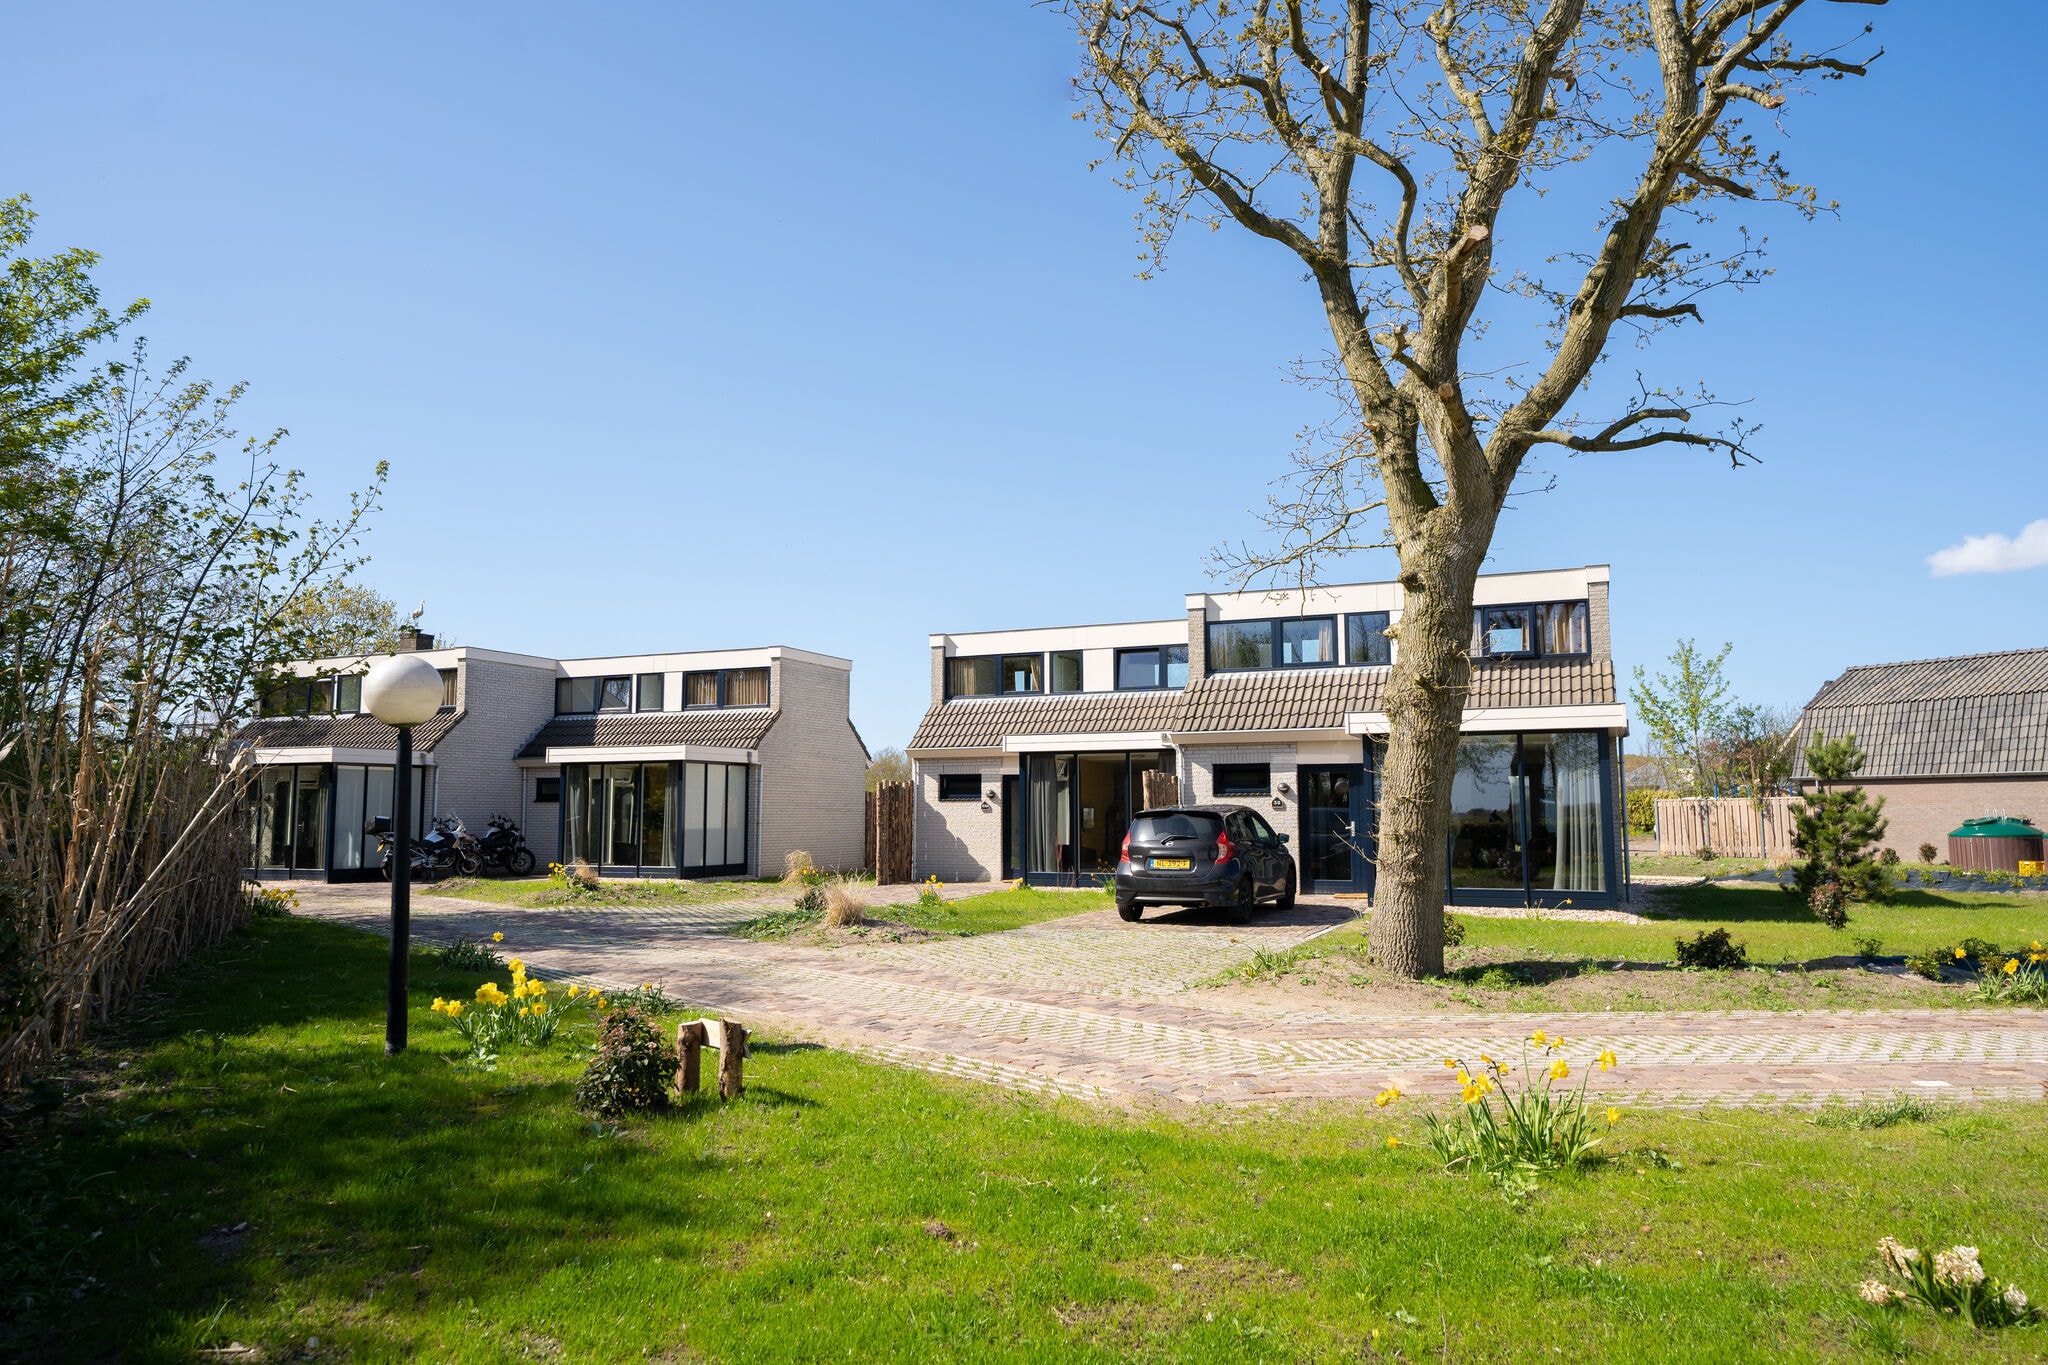 Cozy holiday home with WiFi, located on Texel